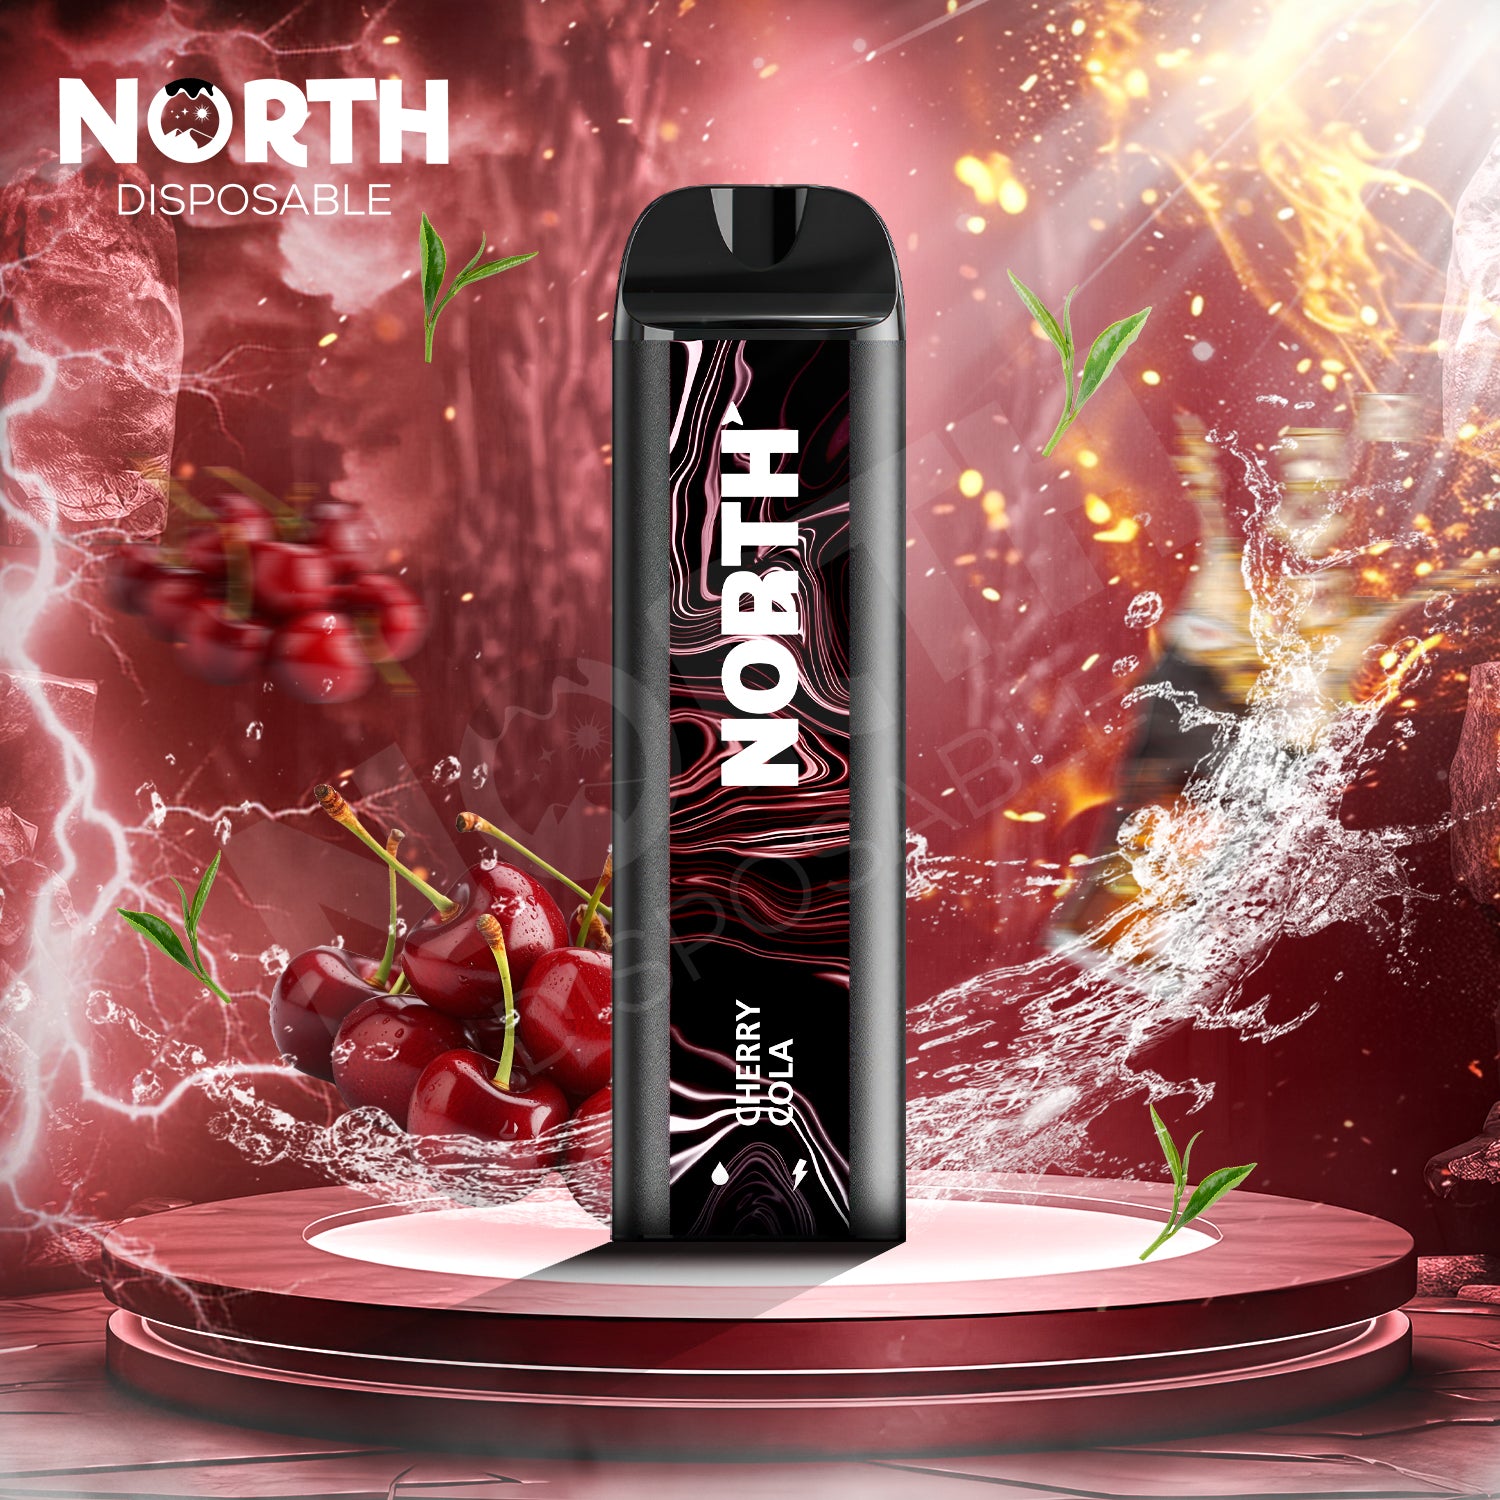 North 5000 Disposable 3% - Cherry Cola